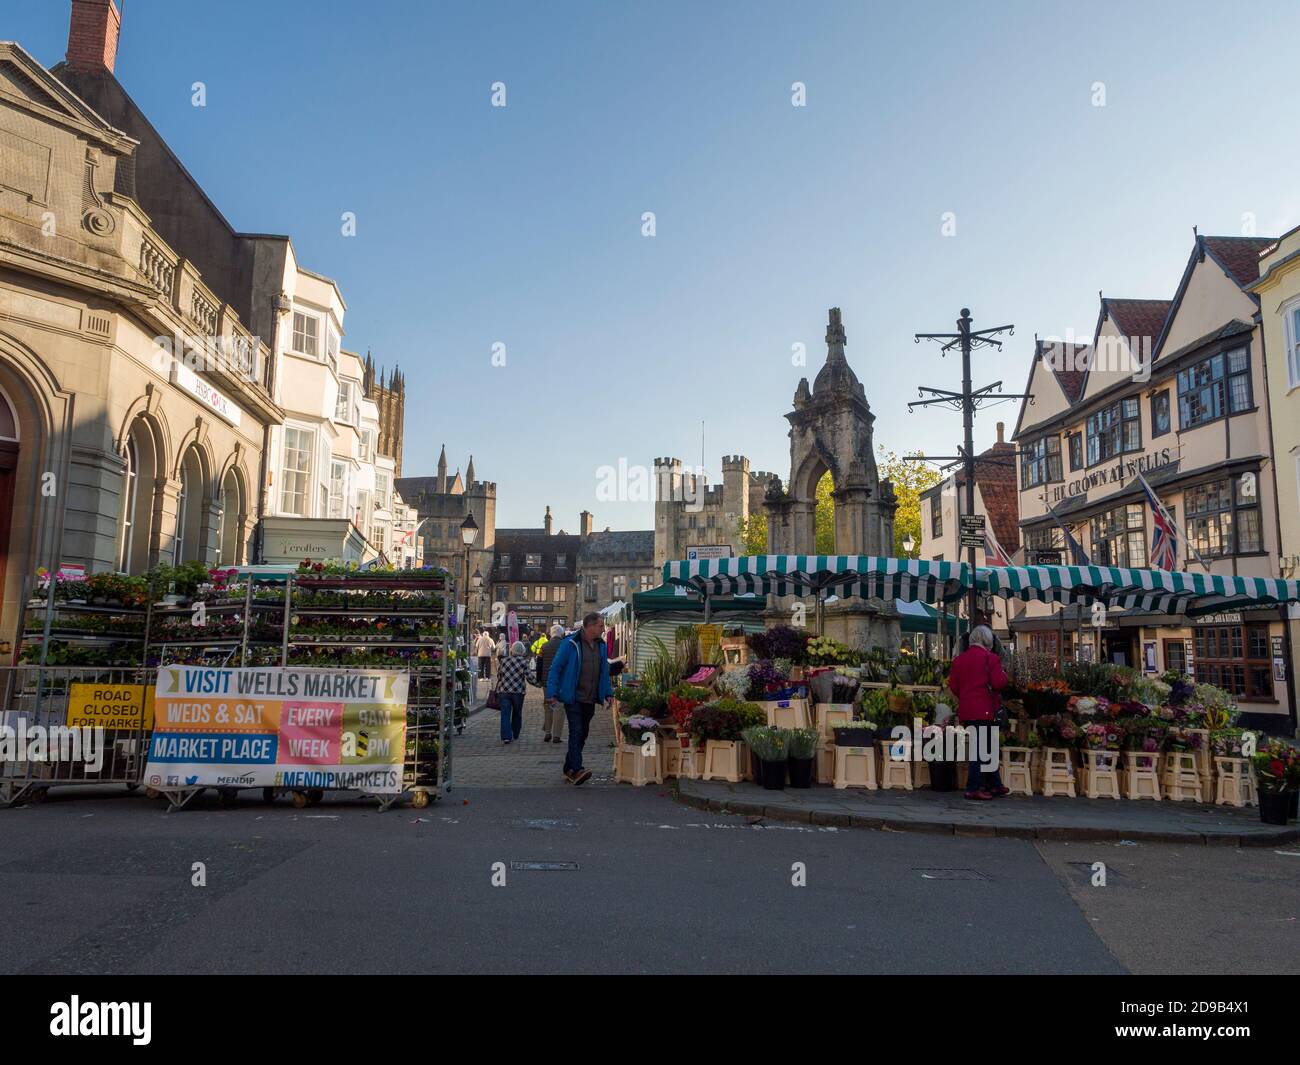 The bi-weekly market taking place at Market Place in the city of Wells, Somerset, England. Stock Photo